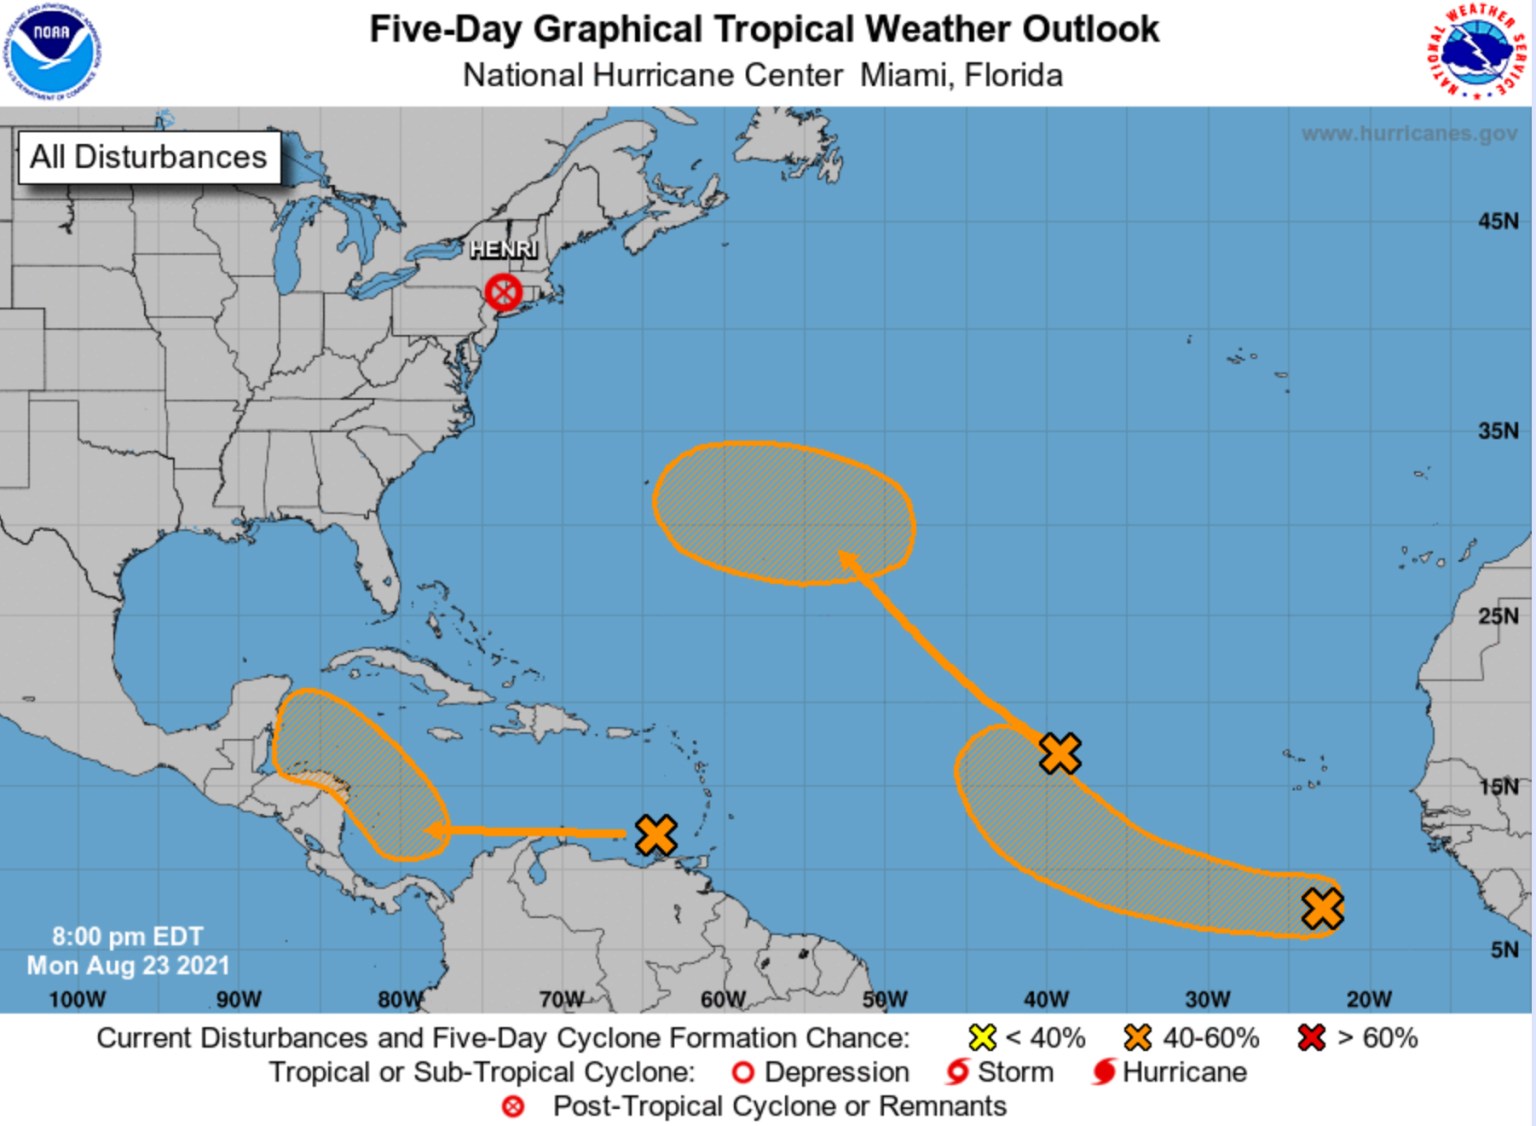 HURRICANE CENTER Northeast Could Get Hit Again, And Again